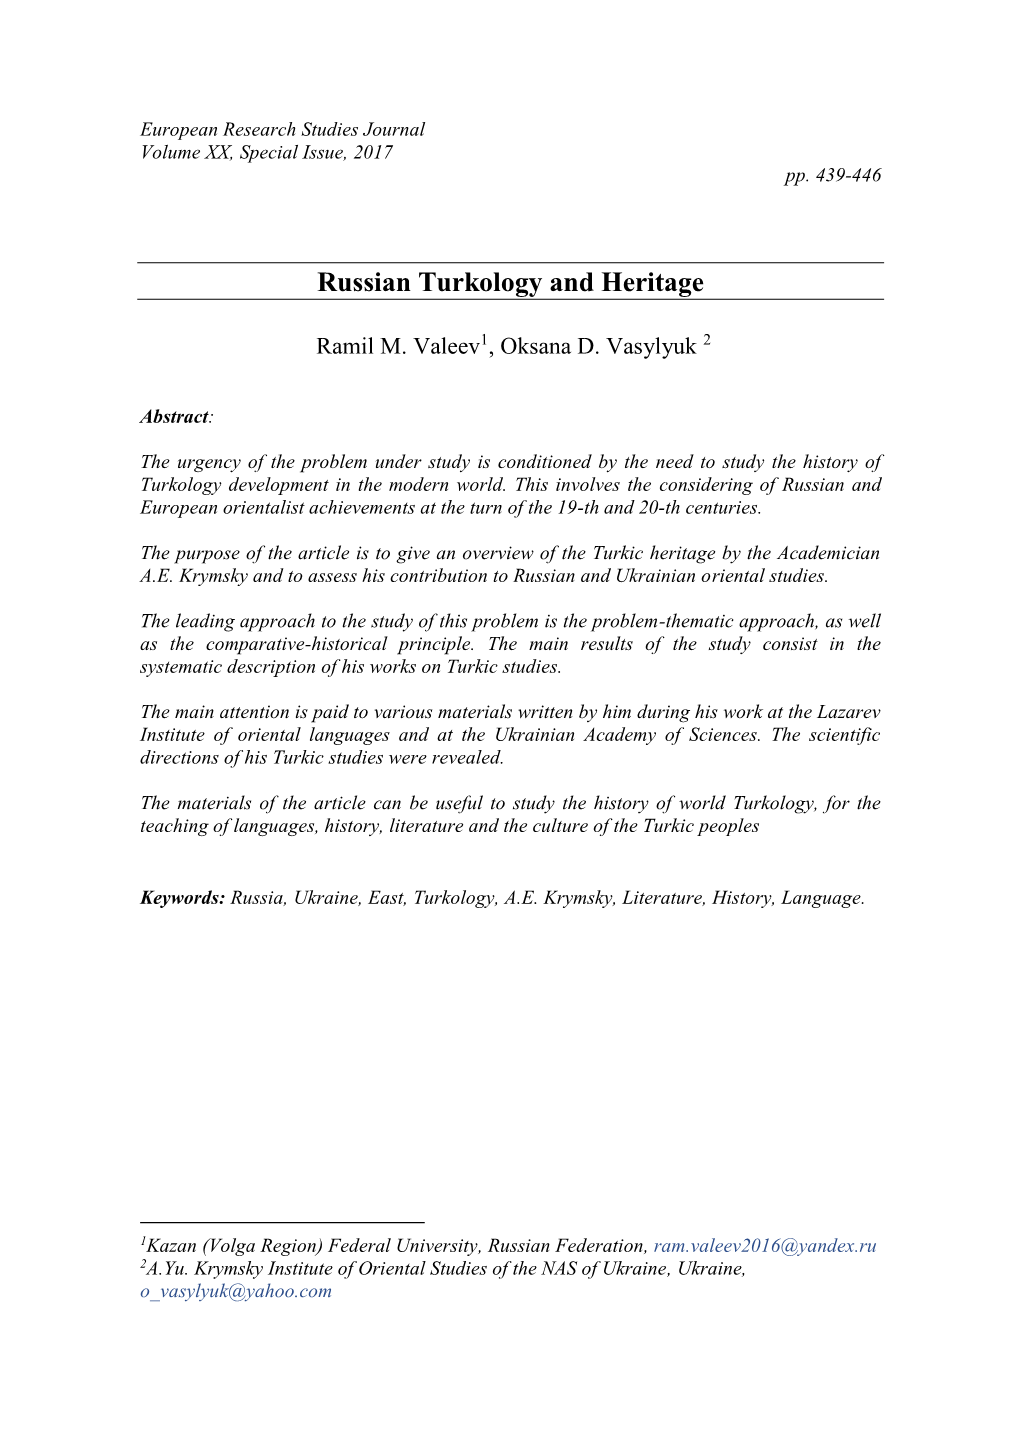 Russian Turkology and Heritage